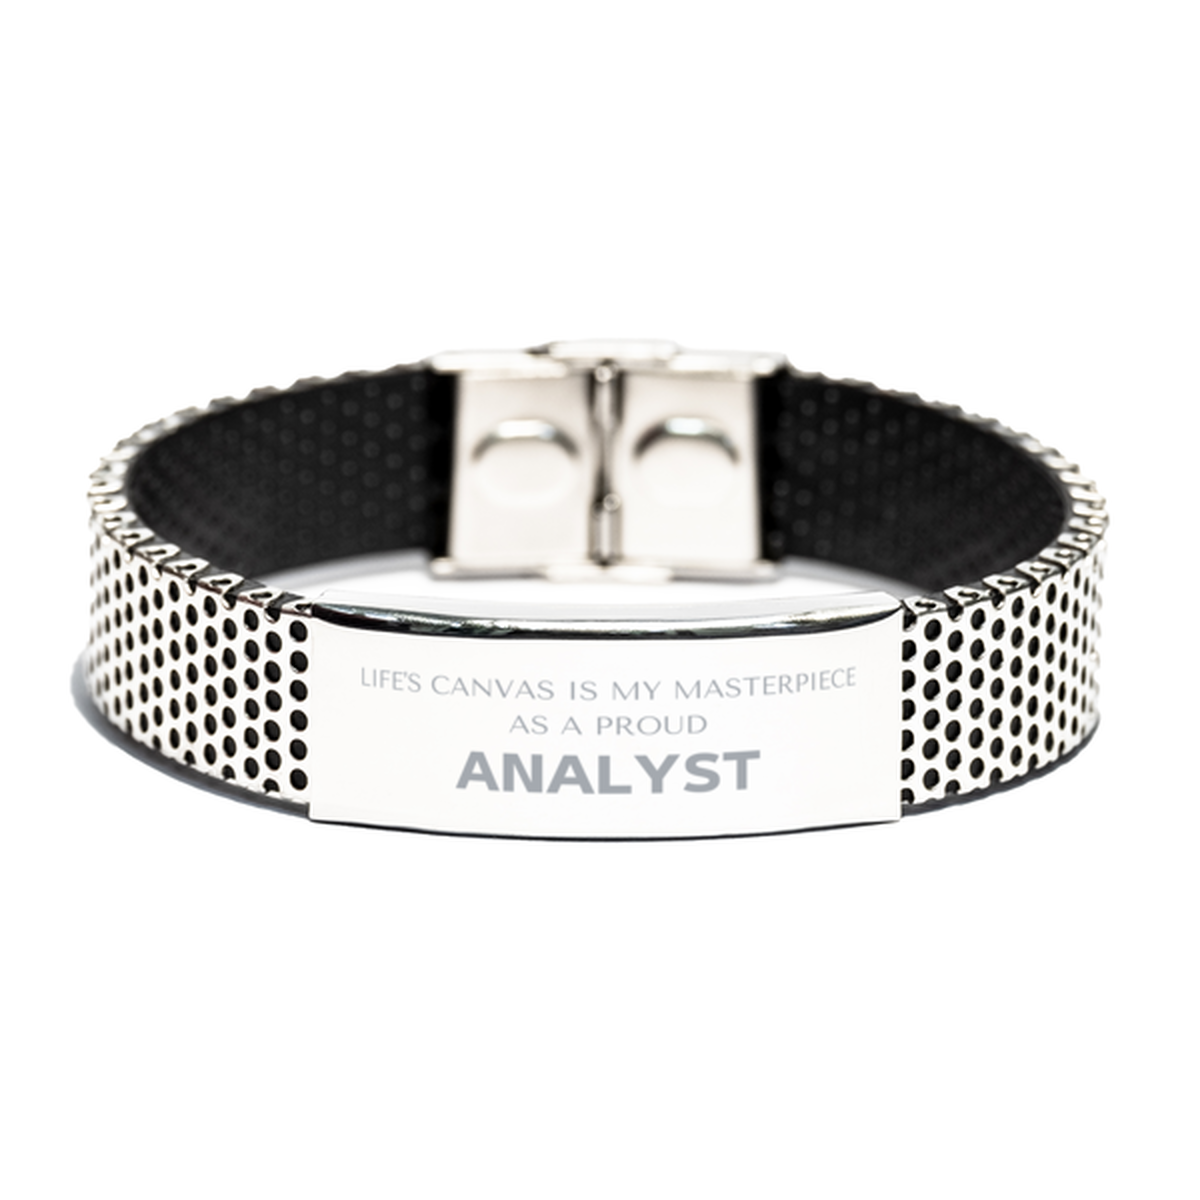 Proud Analyst Gifts, Life's canvas is my masterpiece, Epic Birthday Christmas Unique Stainless Steel Bracelet For Analyst, Coworkers, Men, Women, Friends